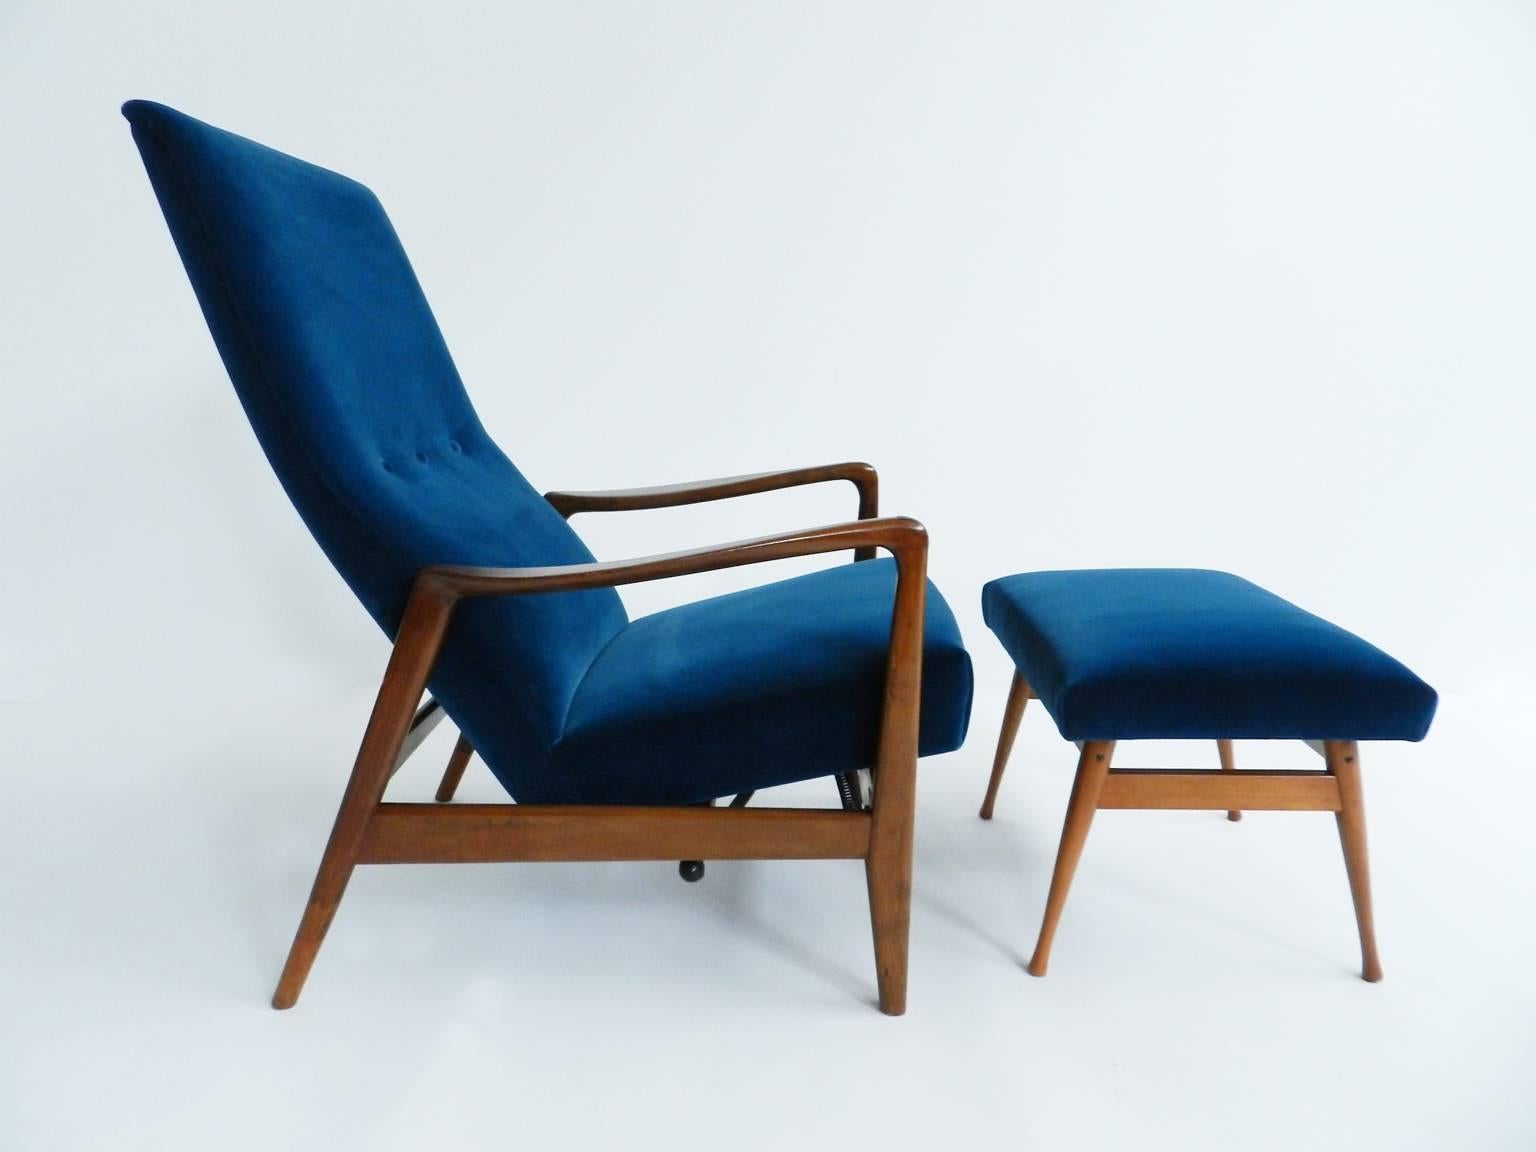 Italian Lounge Chair Model 829 Selected by Gio Ponti for Hotel Parco dei Principi